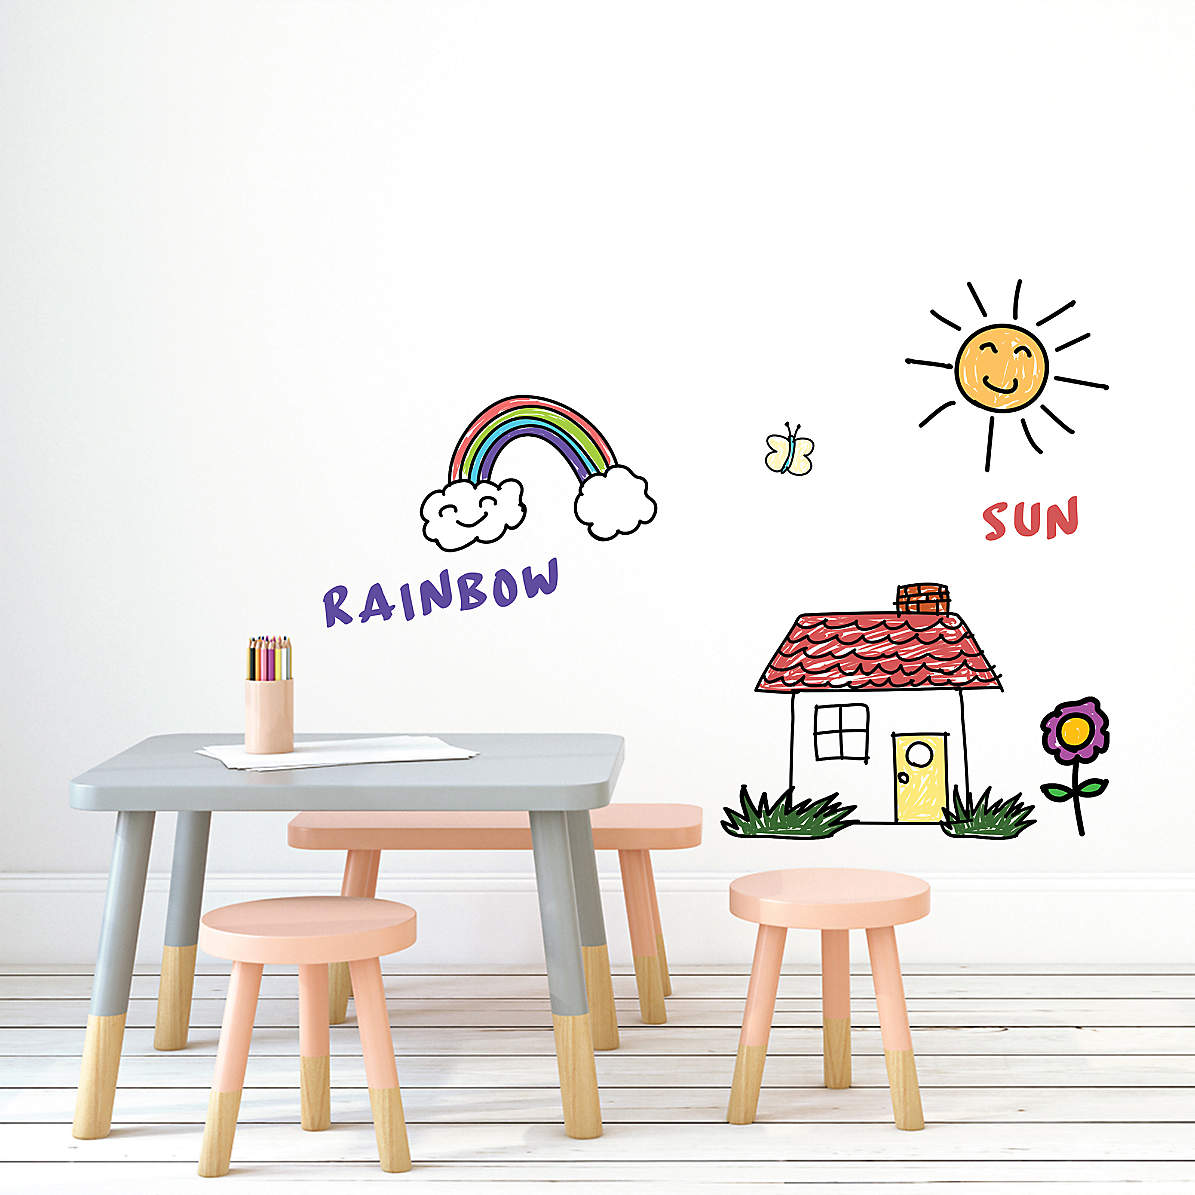 Removable Whiteboard Sticker Wall Stickers Creative Erasable Kids